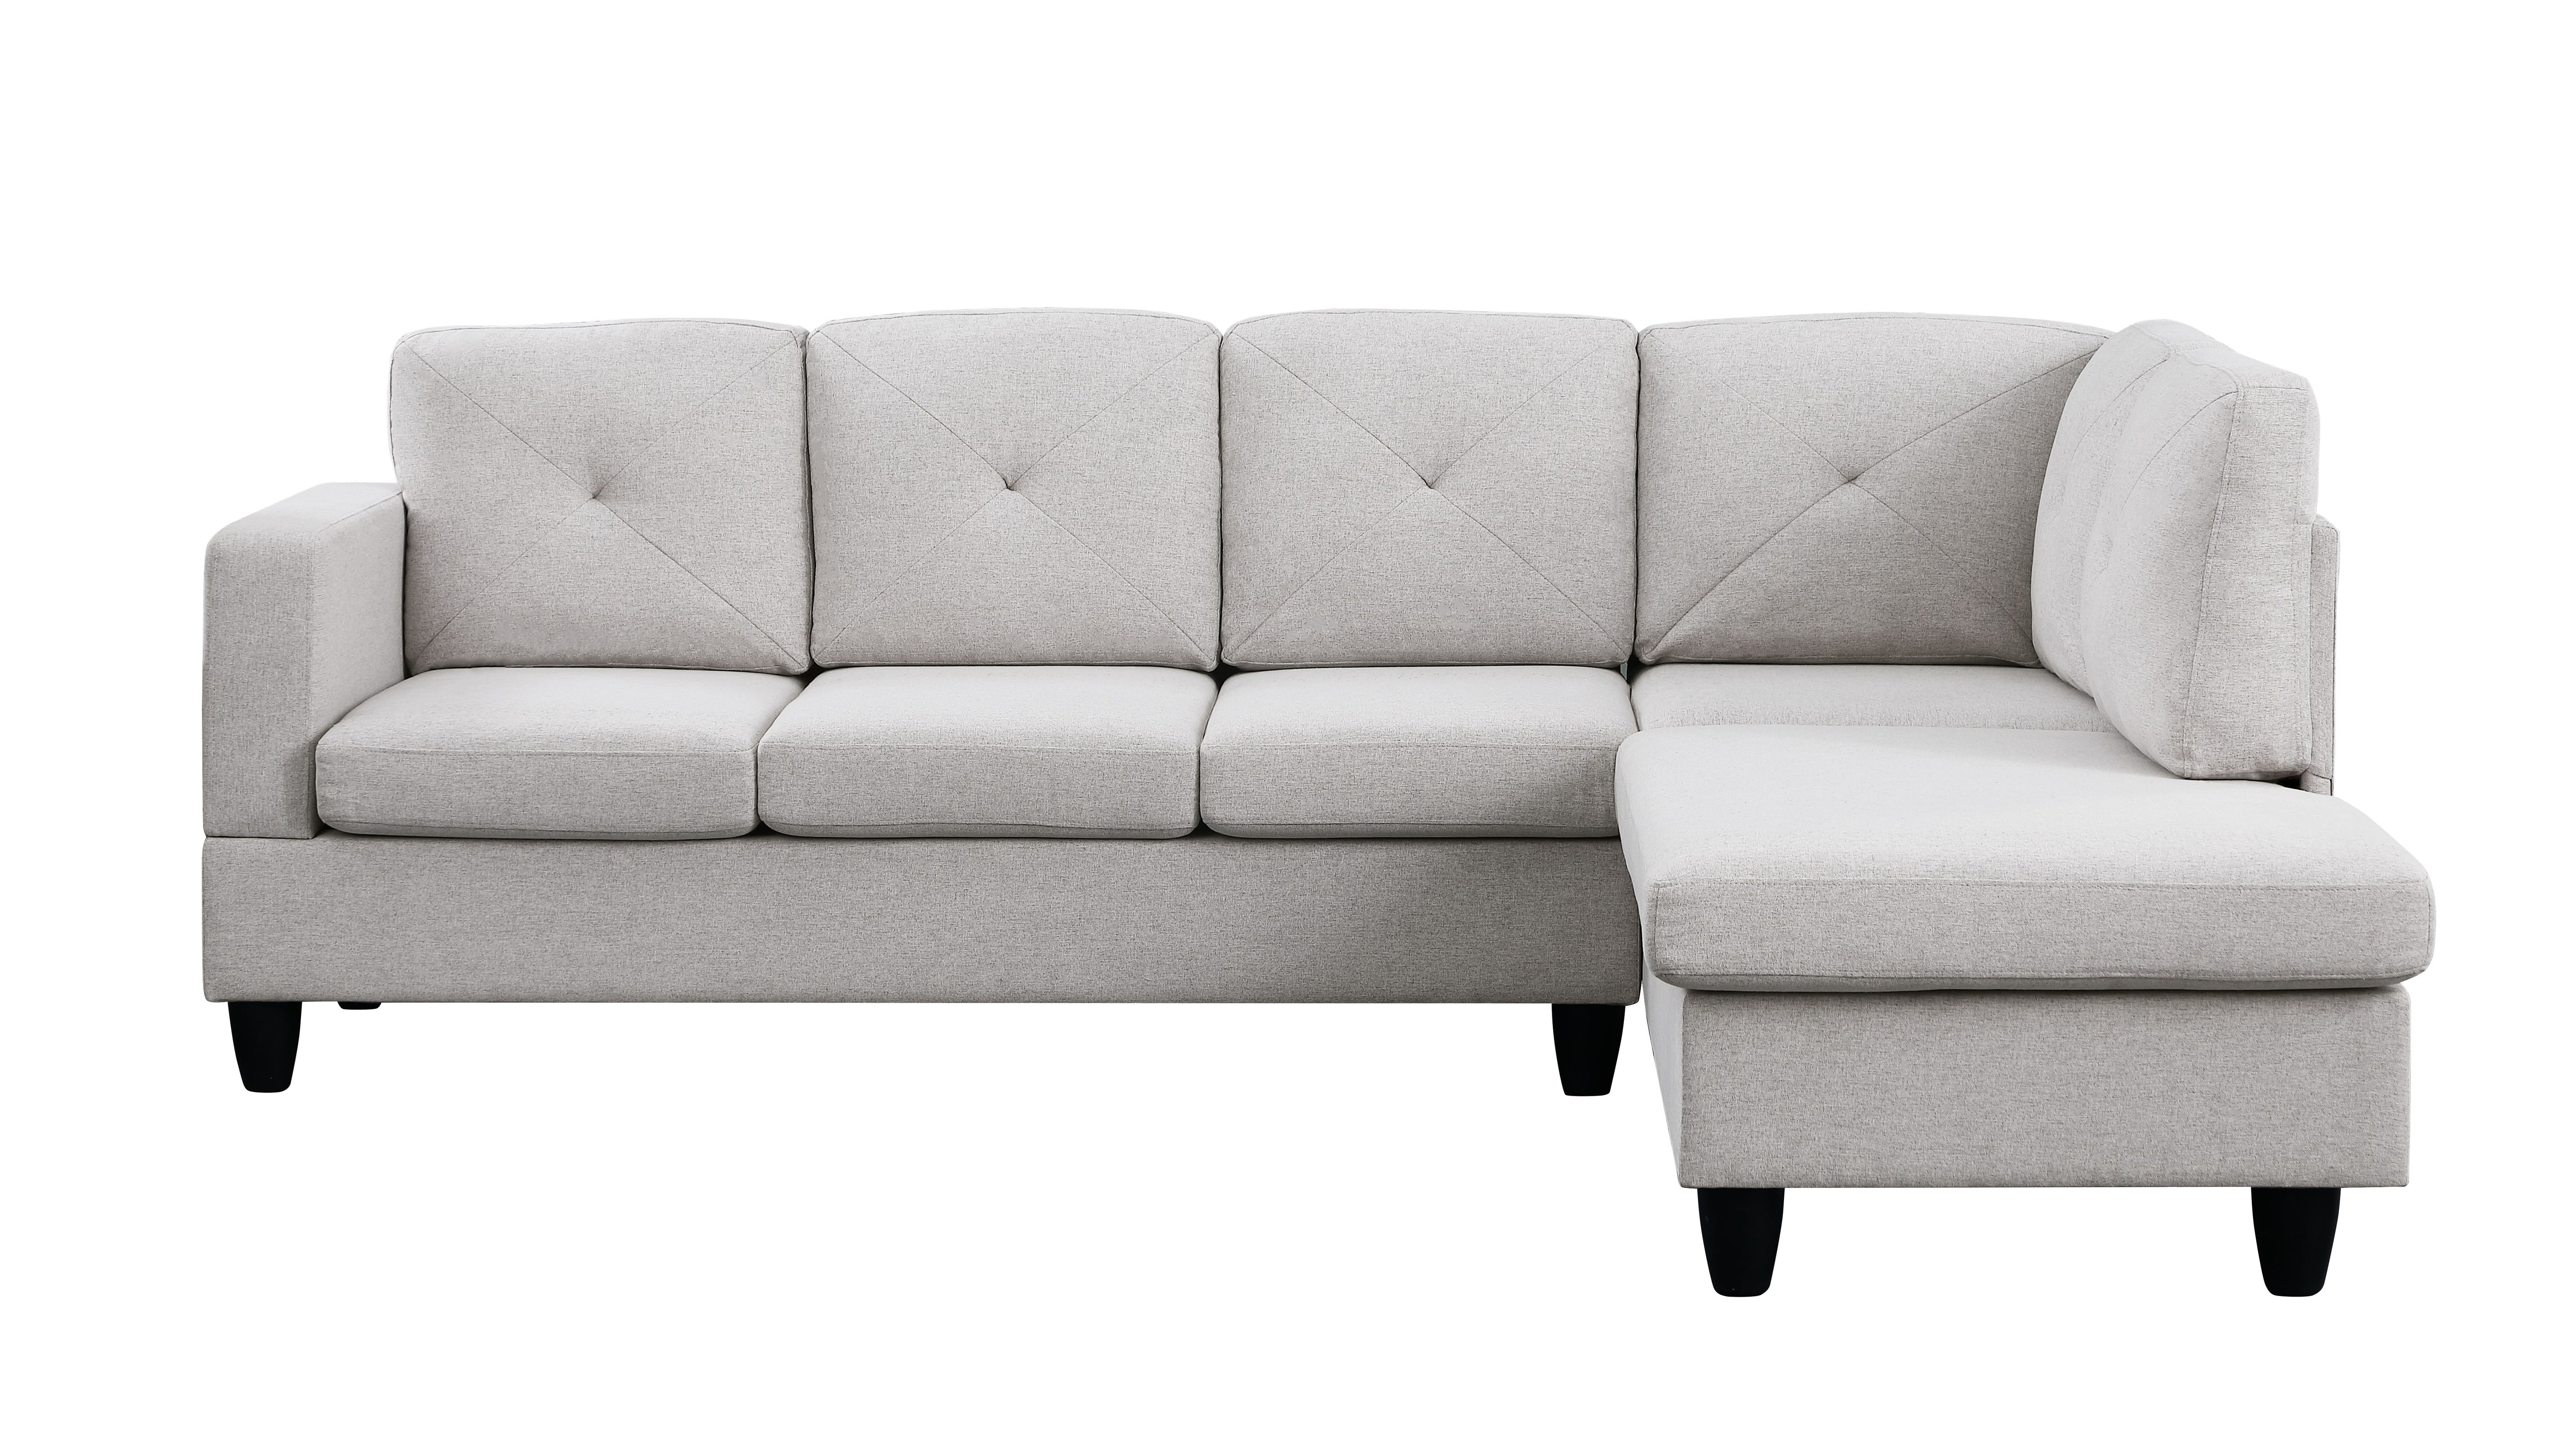 Santiago - Linen Sectional Sofa With Right Facing Chaise